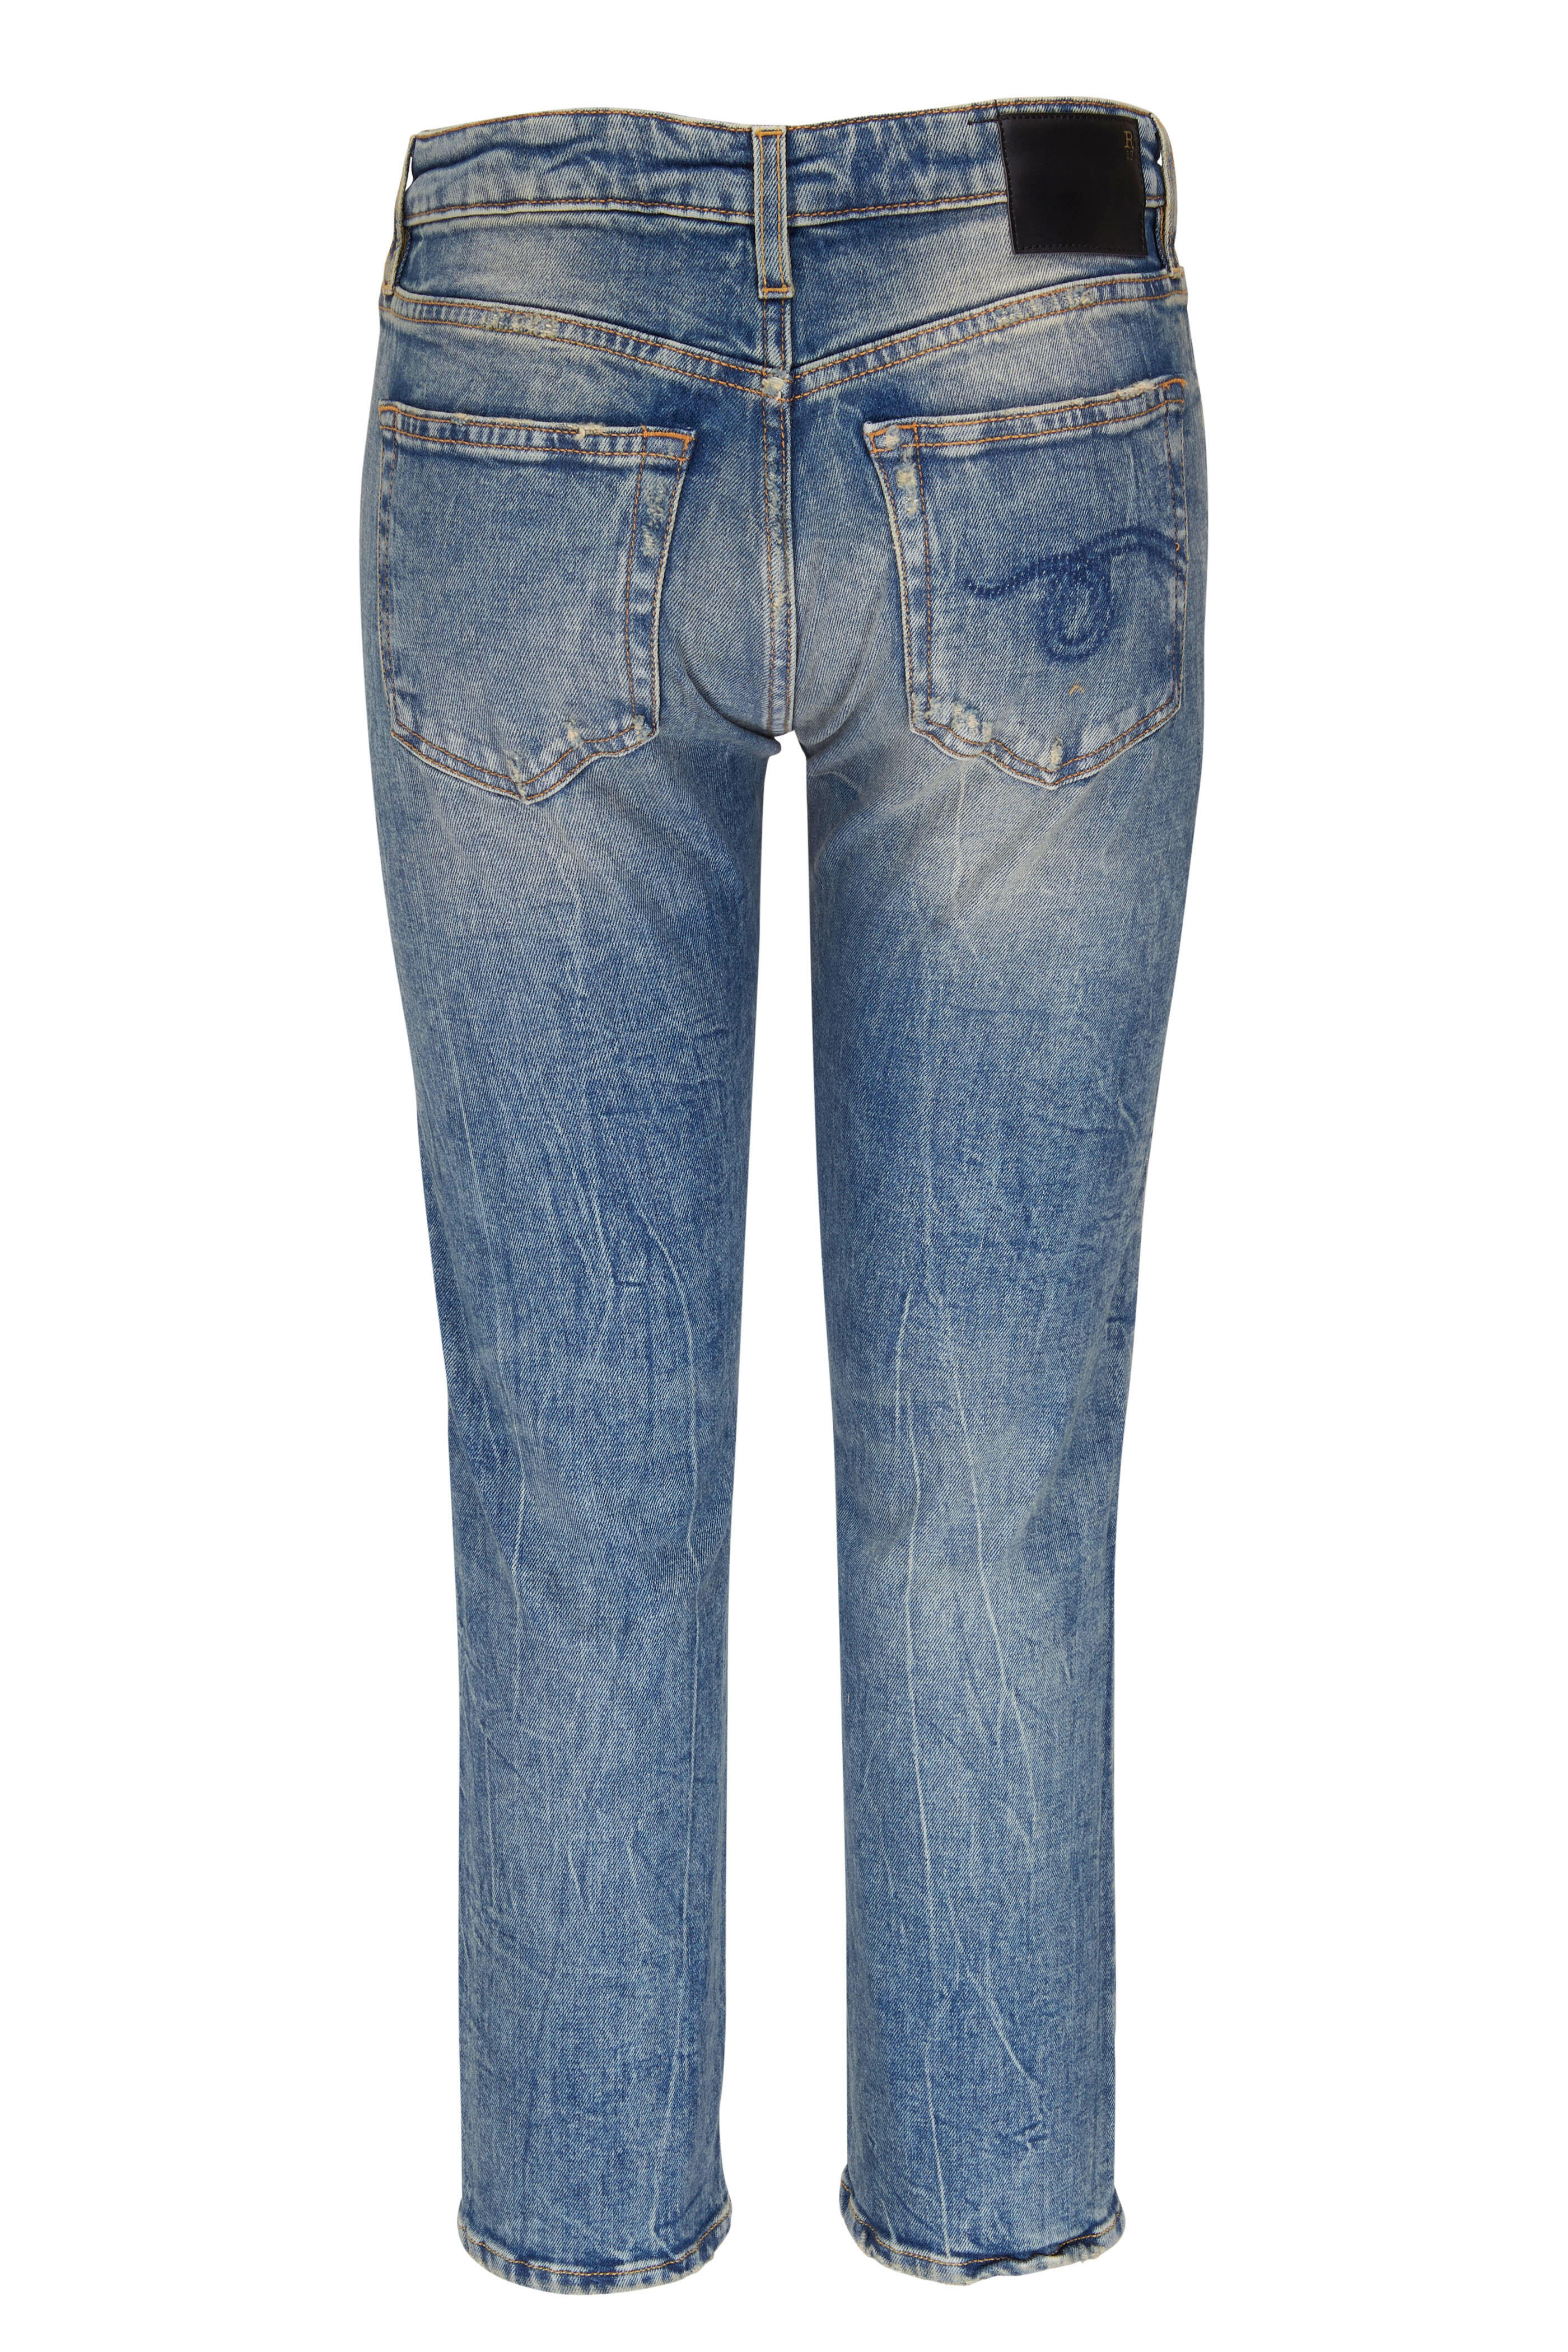 R13 - Boy Straight Kelly Stretch Jeans | Mitchell Stores